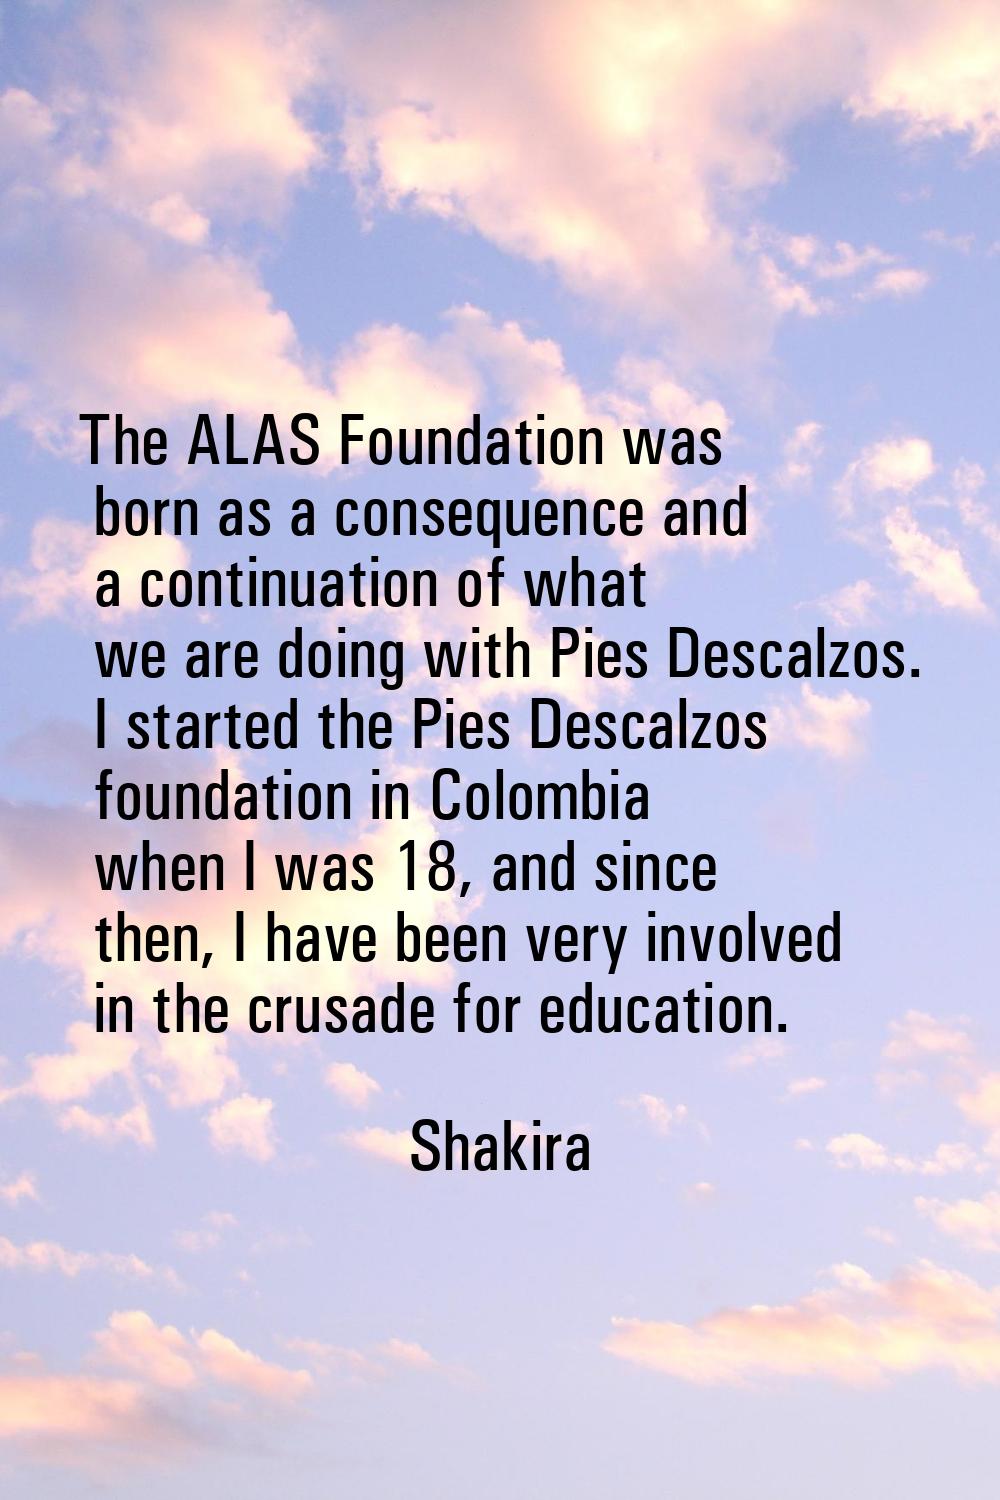 The ALAS Foundation was born as a consequence and a continuation of what we are doing with Pies Des